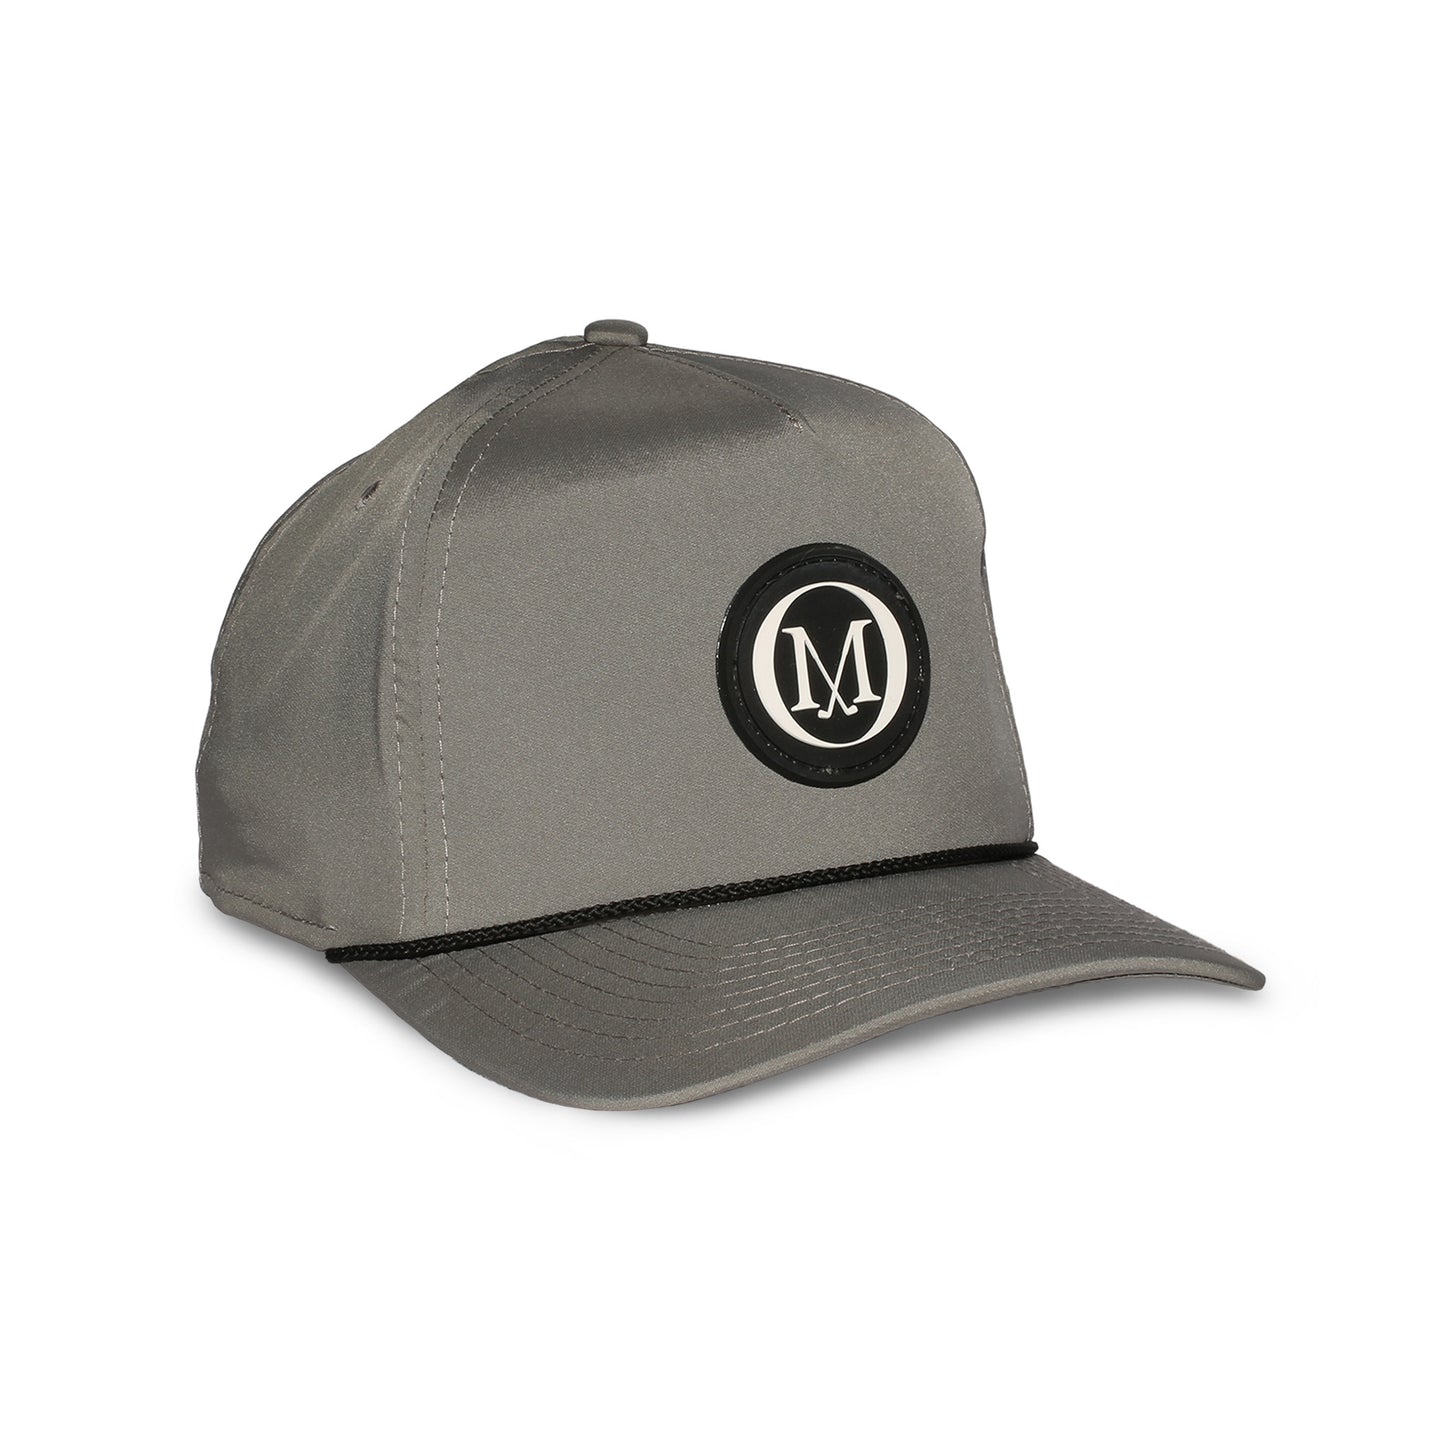 The Wrightson 5054 Hat - Old Macdonald